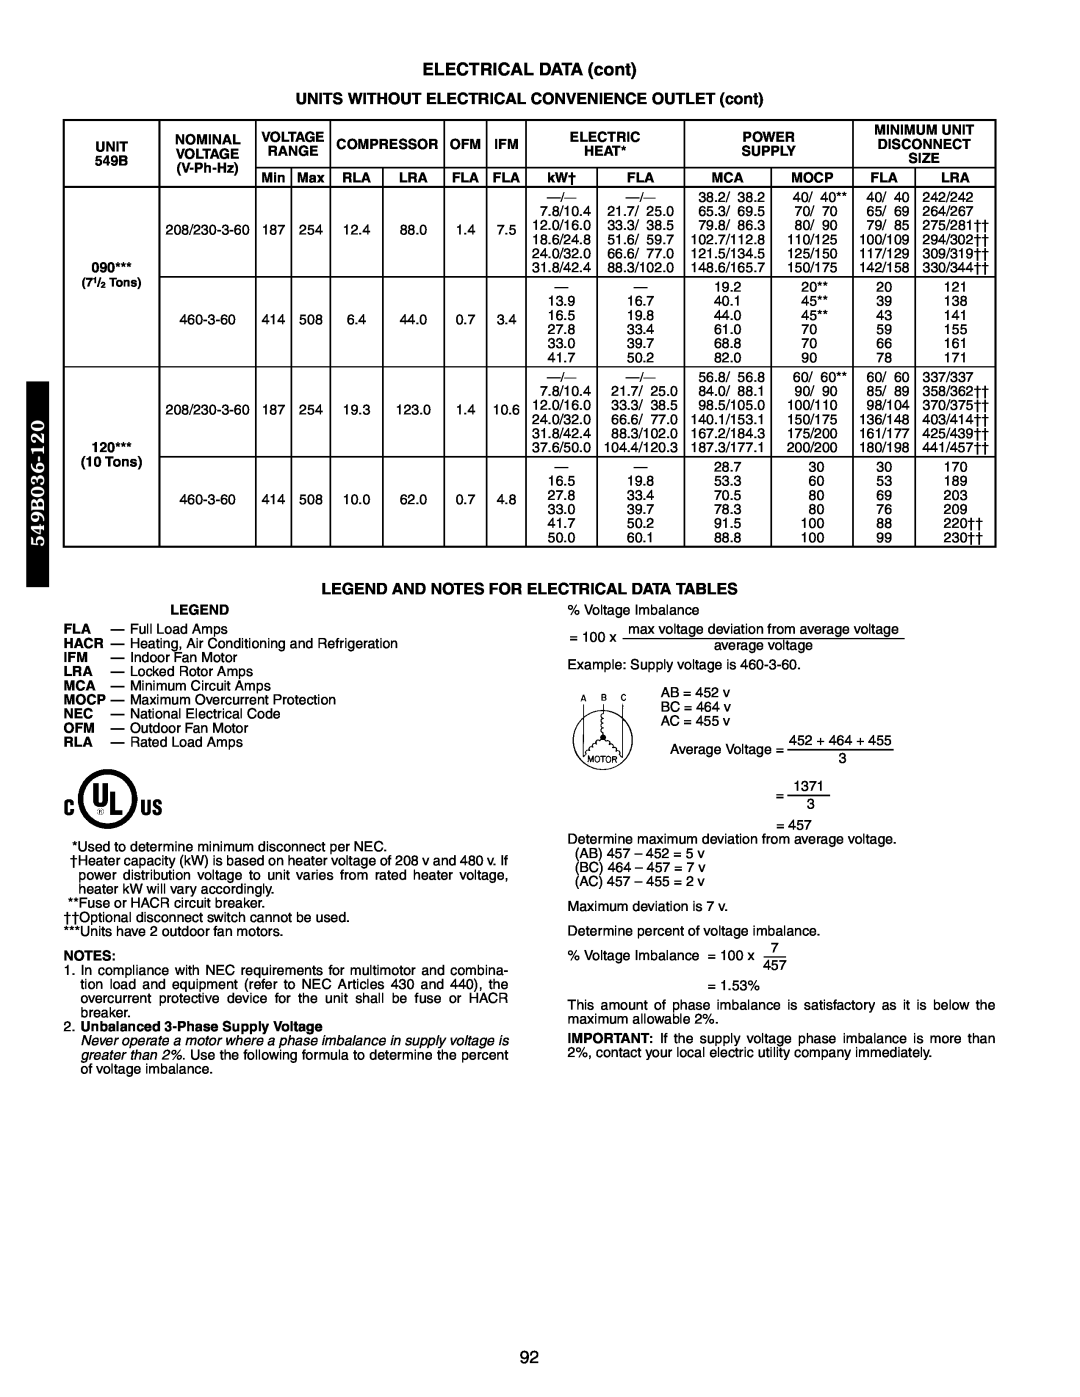 Bryant 542J, 548F manual Legend And Notes For Electrical Data Tables, ELECTRICAL DATA cont, 549B036-120 